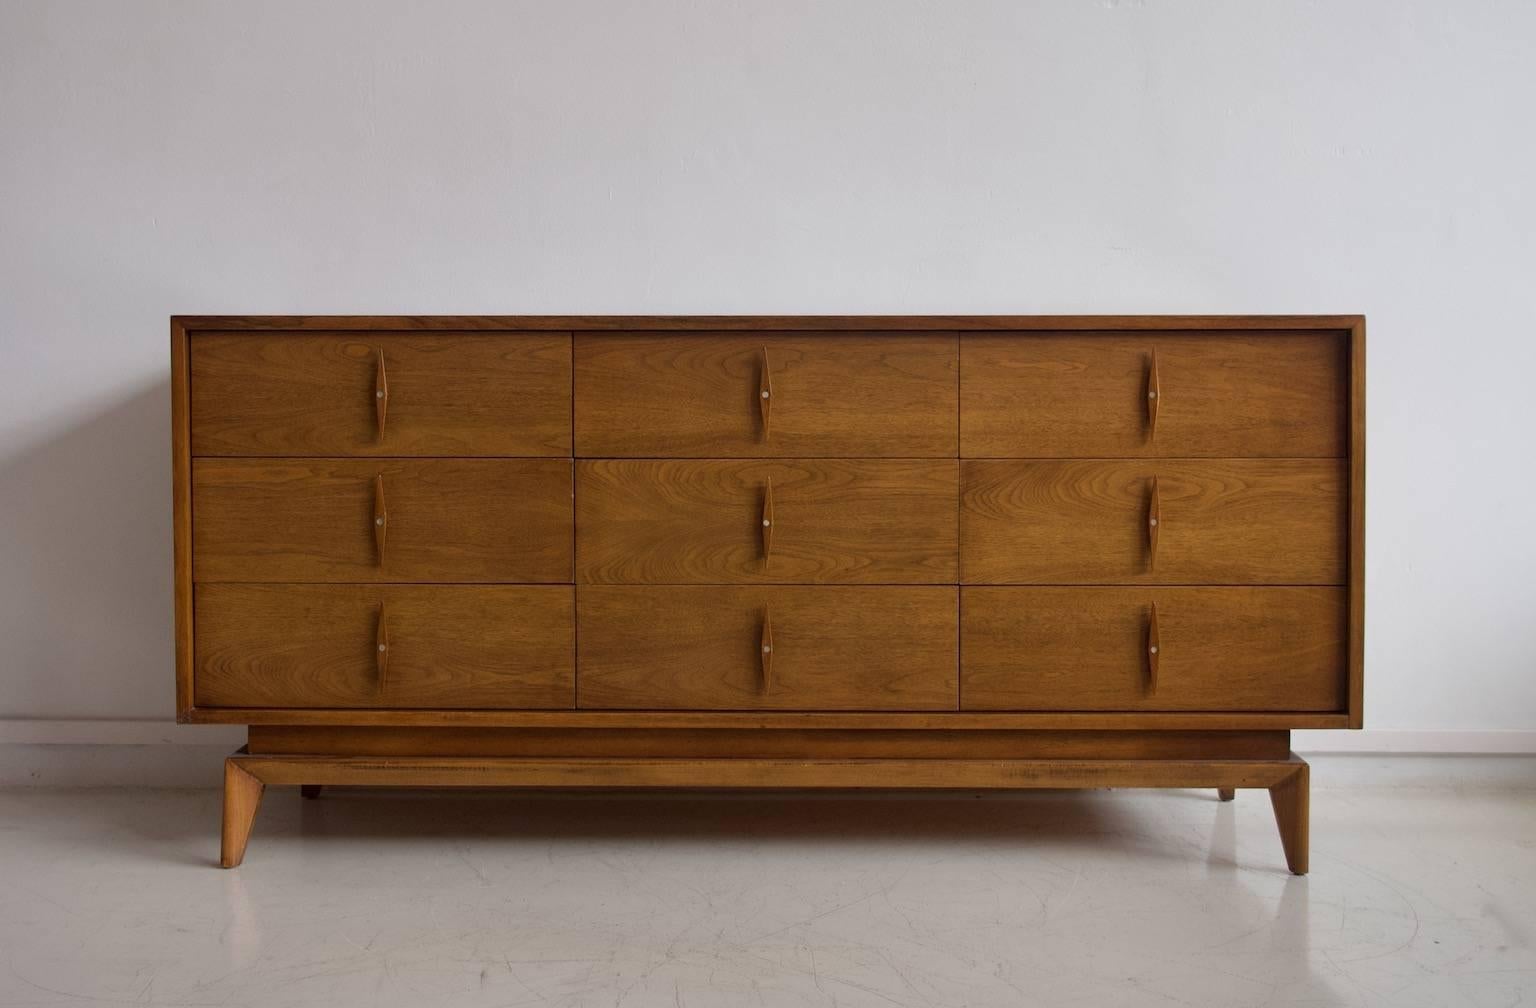 Sideboard or dresser with nine drawers and slightly slanted legs made of walnut wood. Manufactured during the 1950s by American of Martinsville. Label stamped inside one of the drawers.